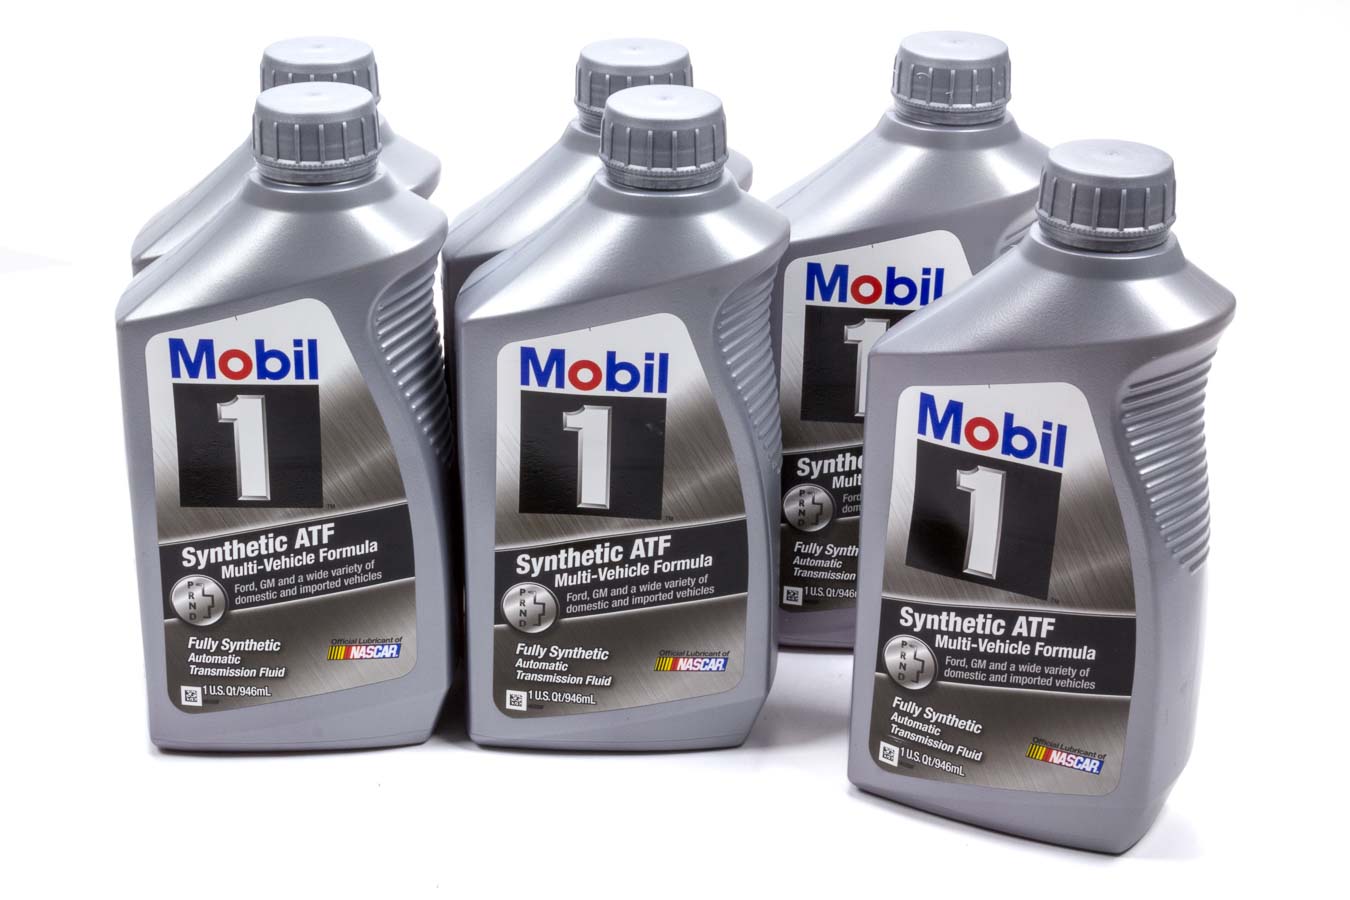 Mobil+1+Synthetic+LV+ATF+HP+Auto+Trans+Fluid+6+QT+Case+124715 for